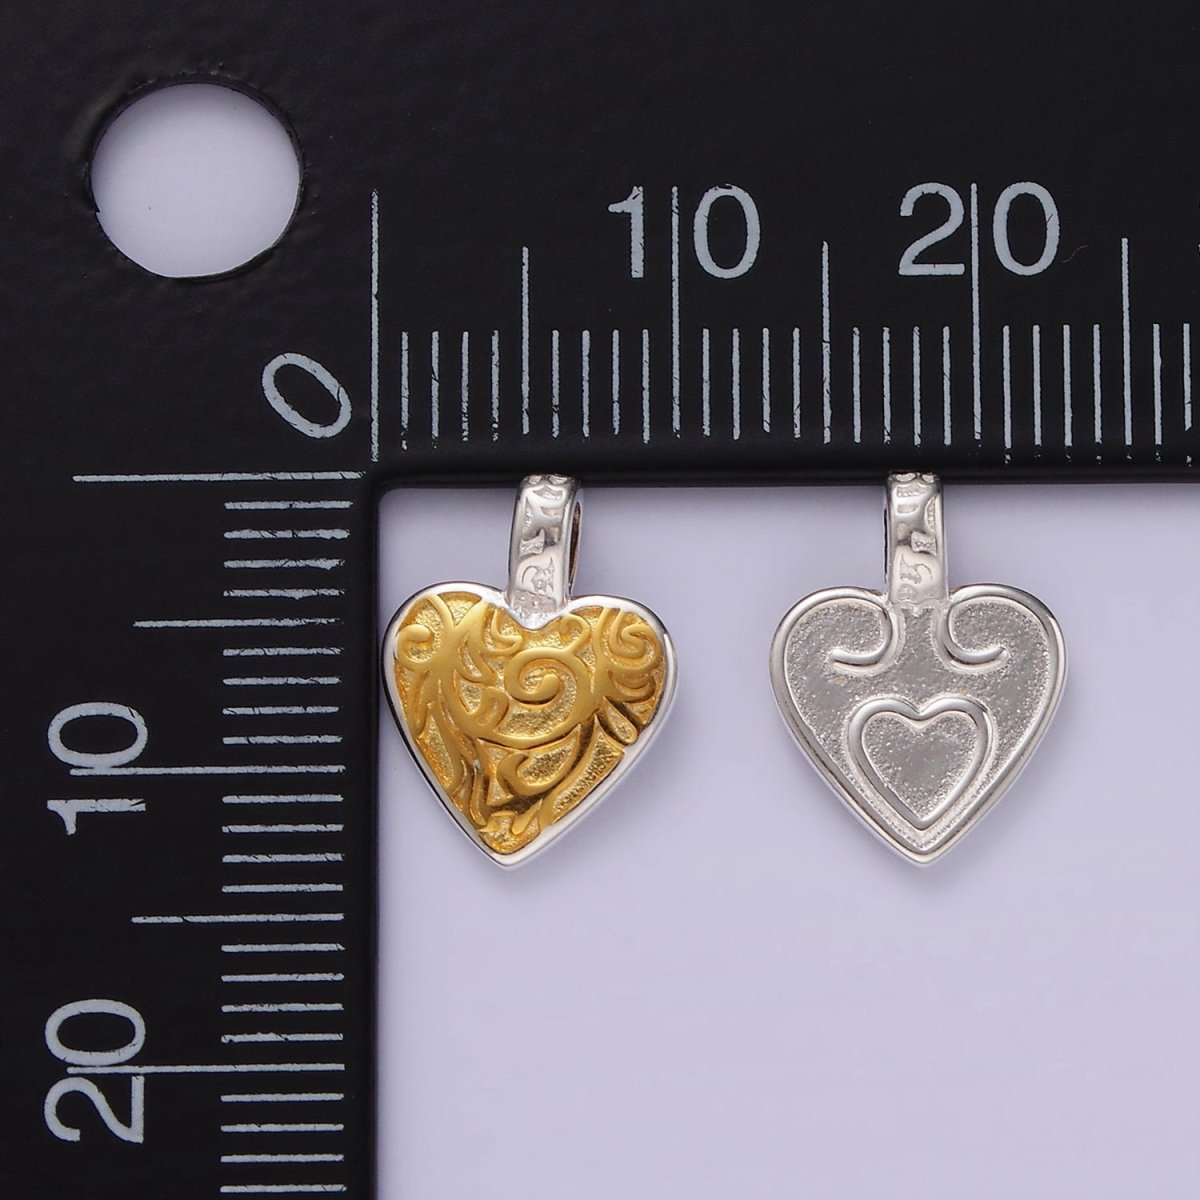 S925 Sterling Silver Artisan Heart Double Sided Mixed Metal Pendant | SL-438 - DLUXCA